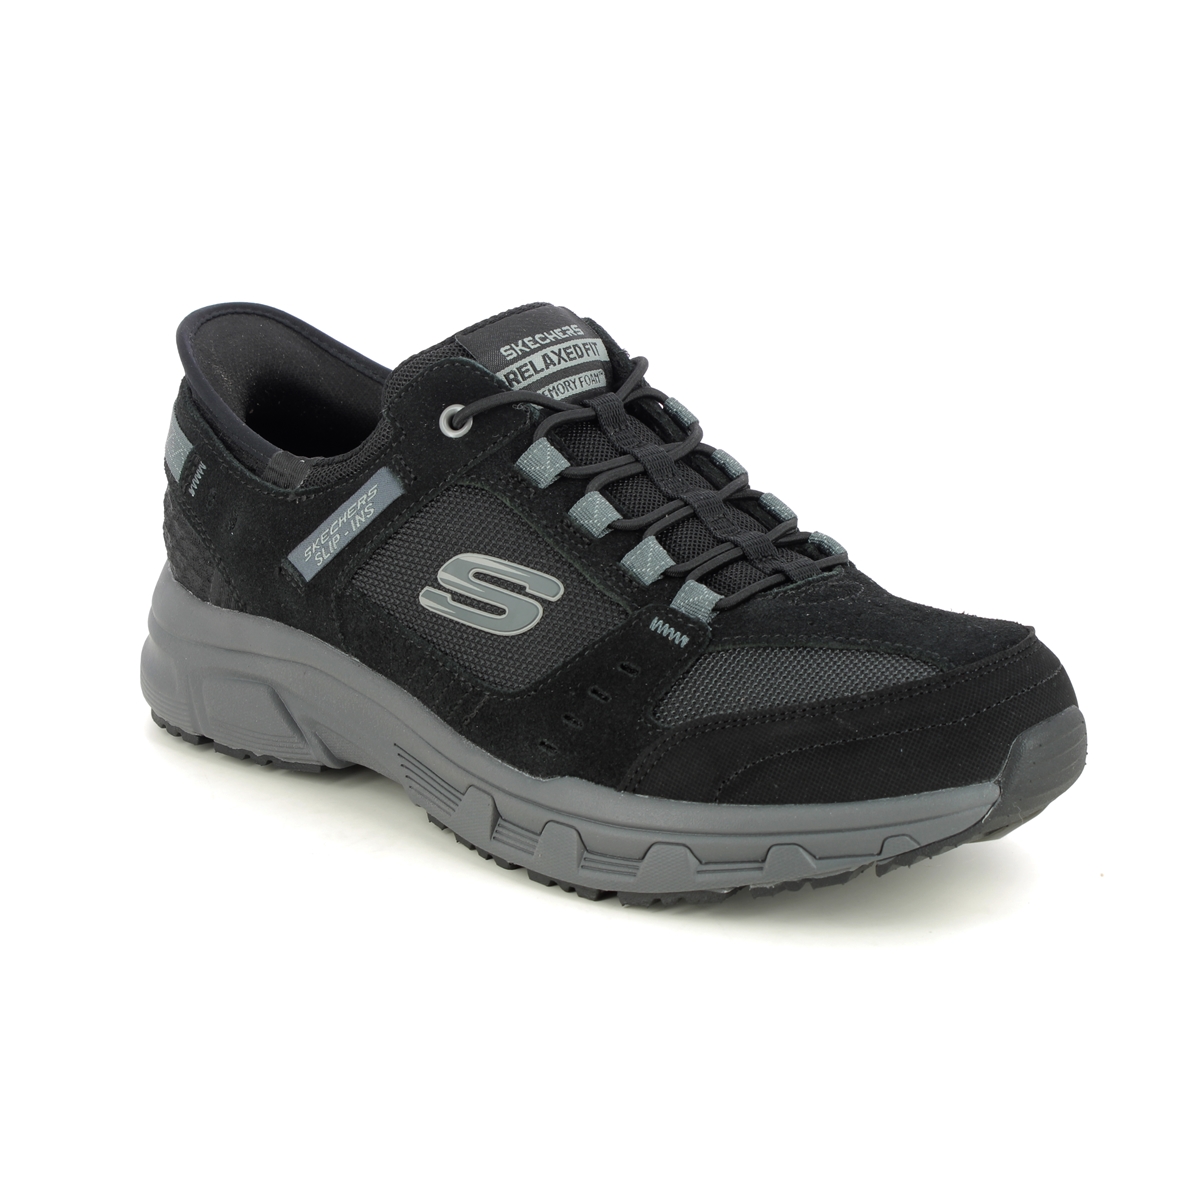 Skechers Slip Ins Canyon BKCC Black Charcoal Grey Mens Slip-on Shoes 237450 in a Plain Leather and Man-made in Size 9